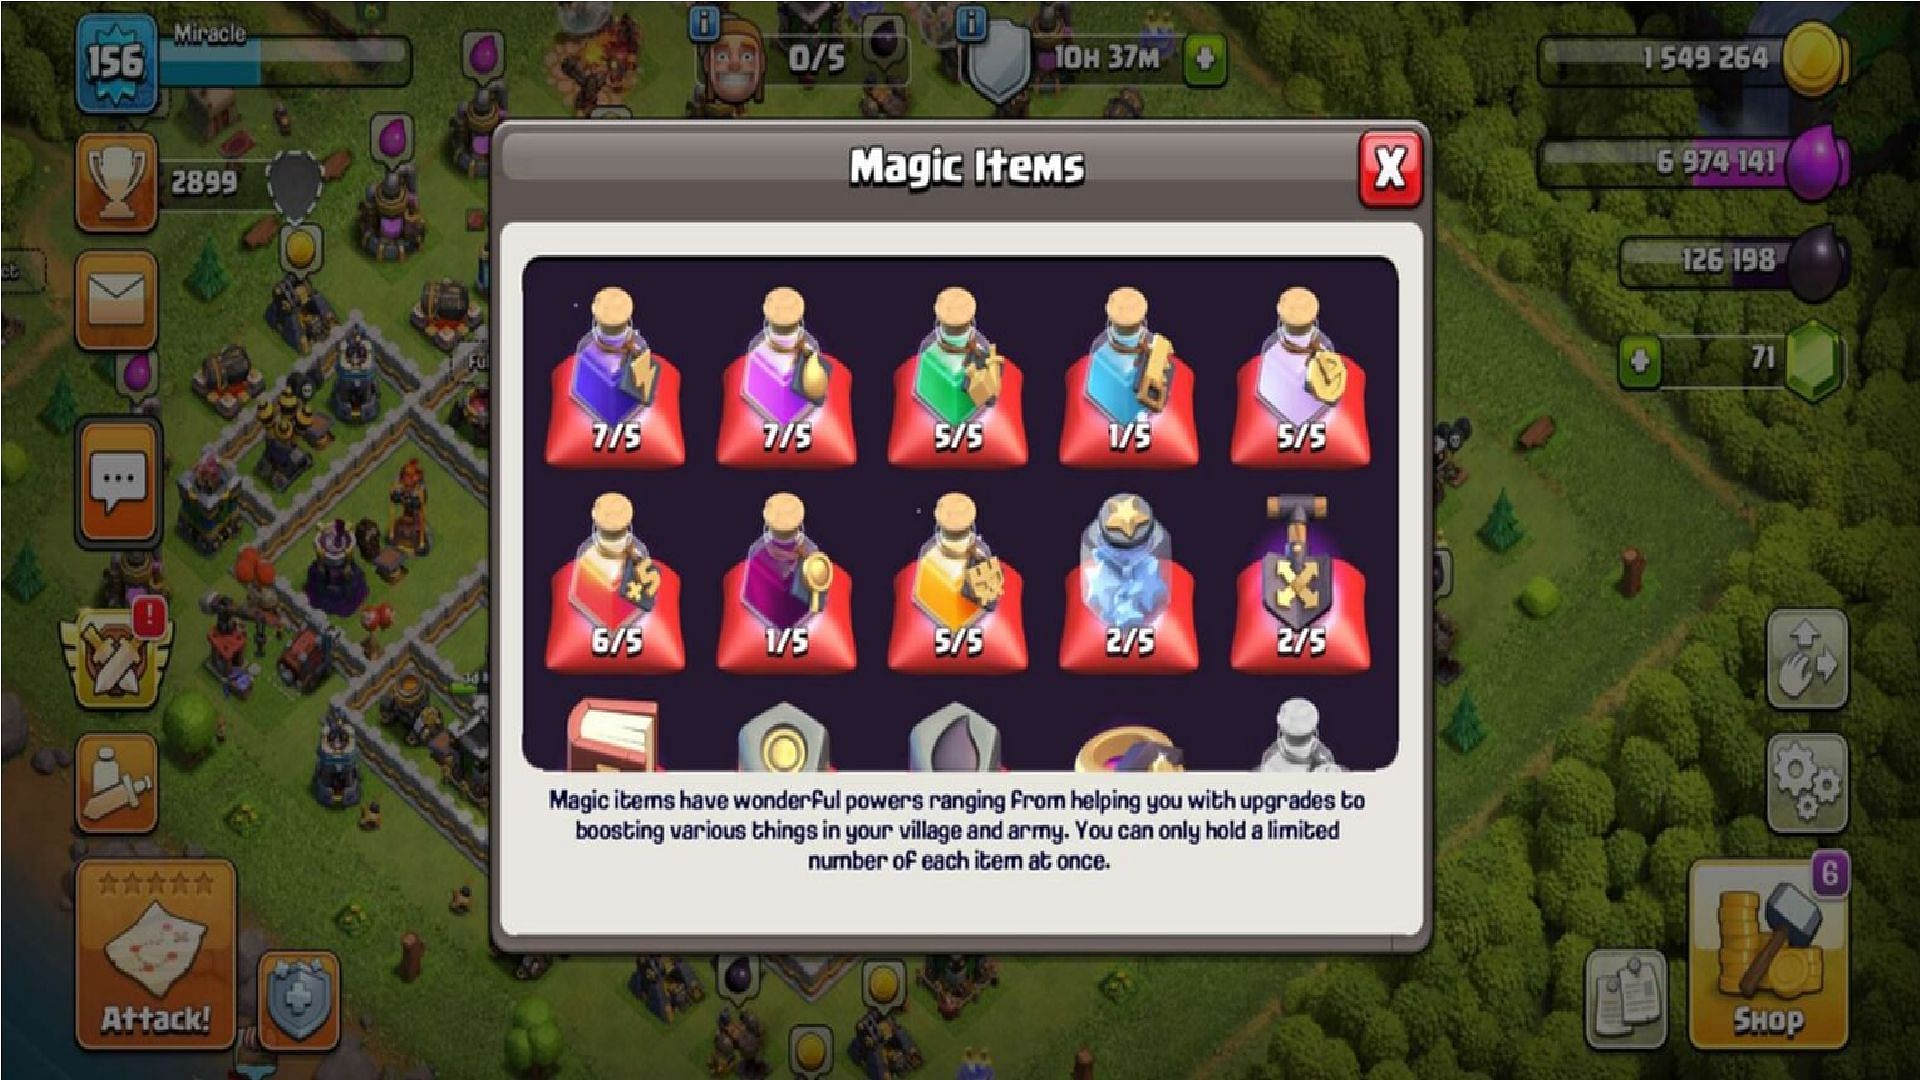 Sell Magic Items for Gems (Image via Supercell)